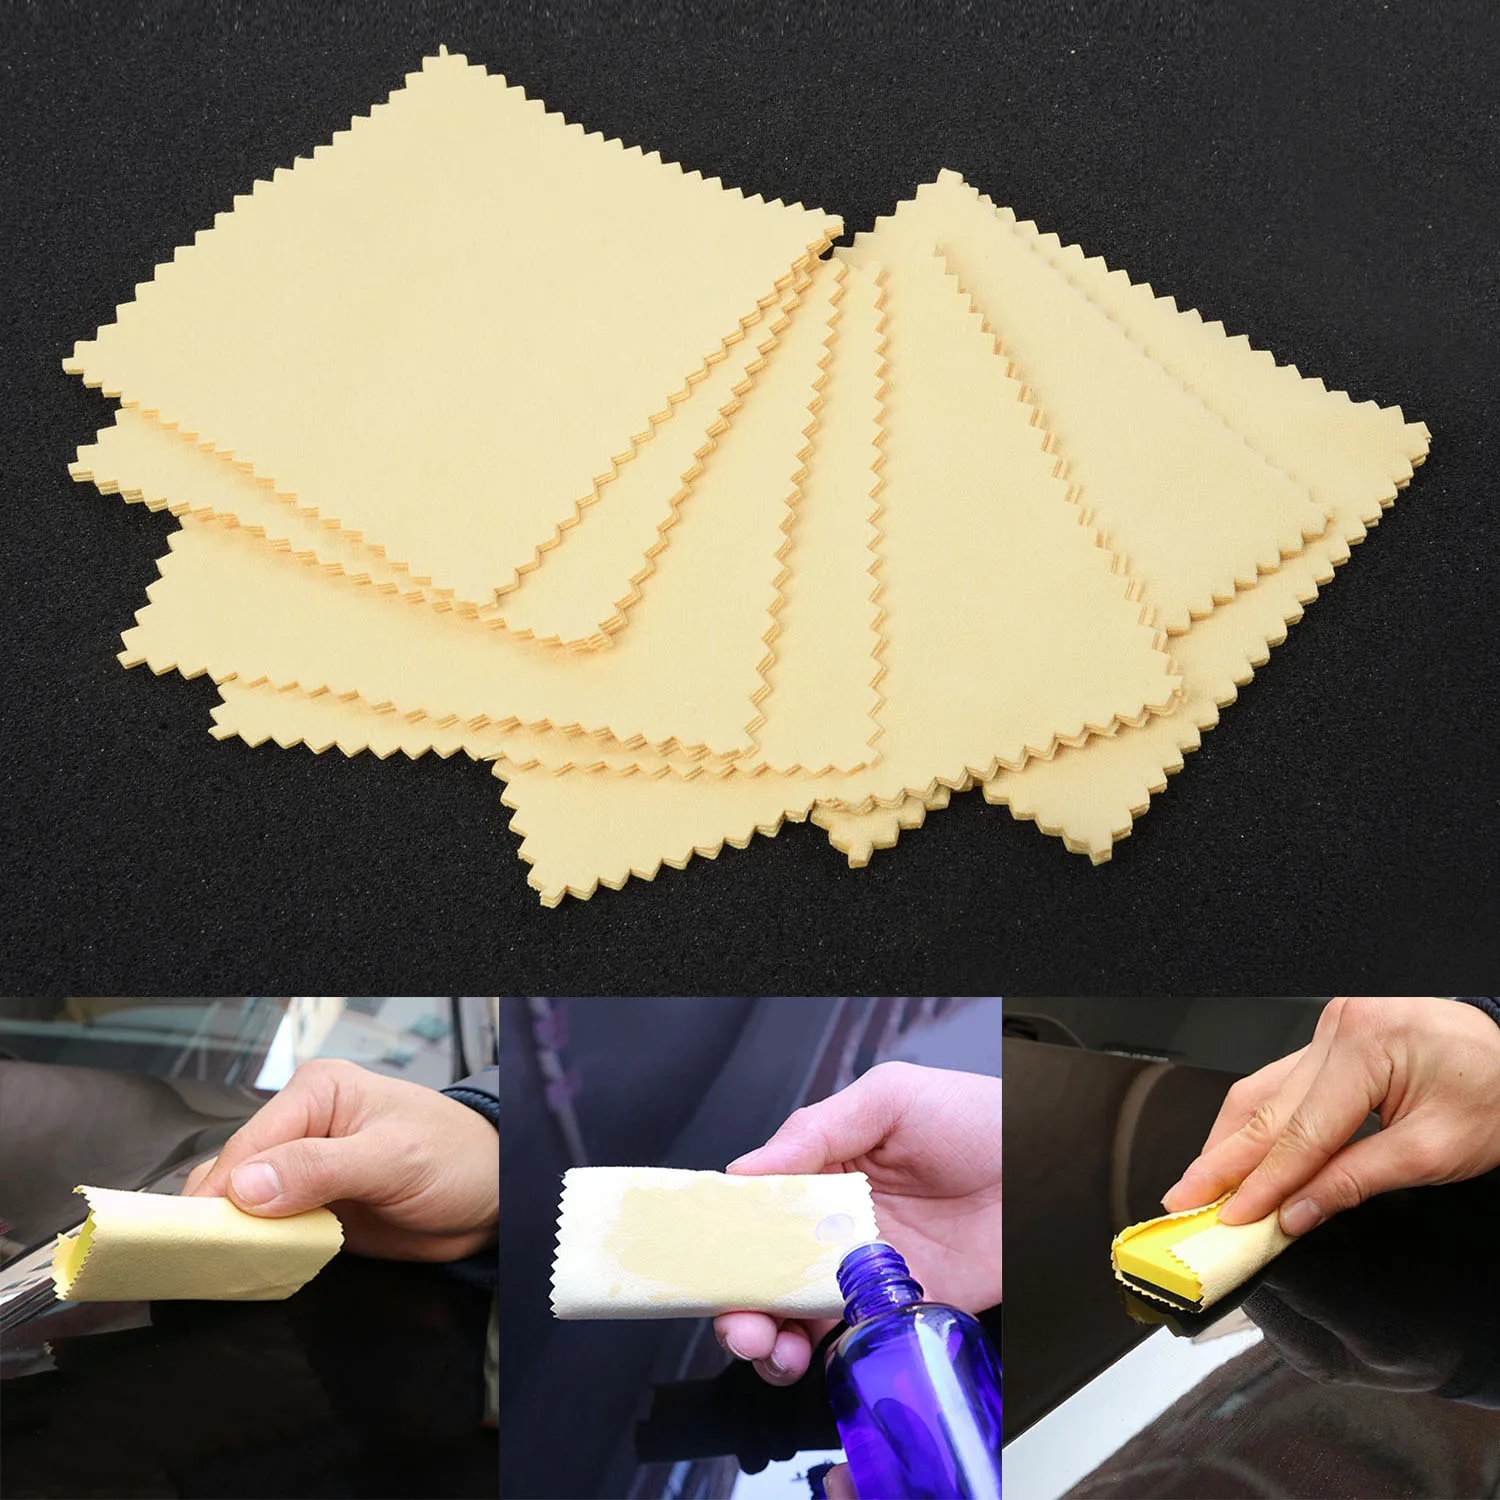 

20Pcs Durable Nano Ceramic Car Cleaning Cloths Auto Absorbent Microfiber Wiping Rags Wash Towel Automobiles Cleaning Drying Clot